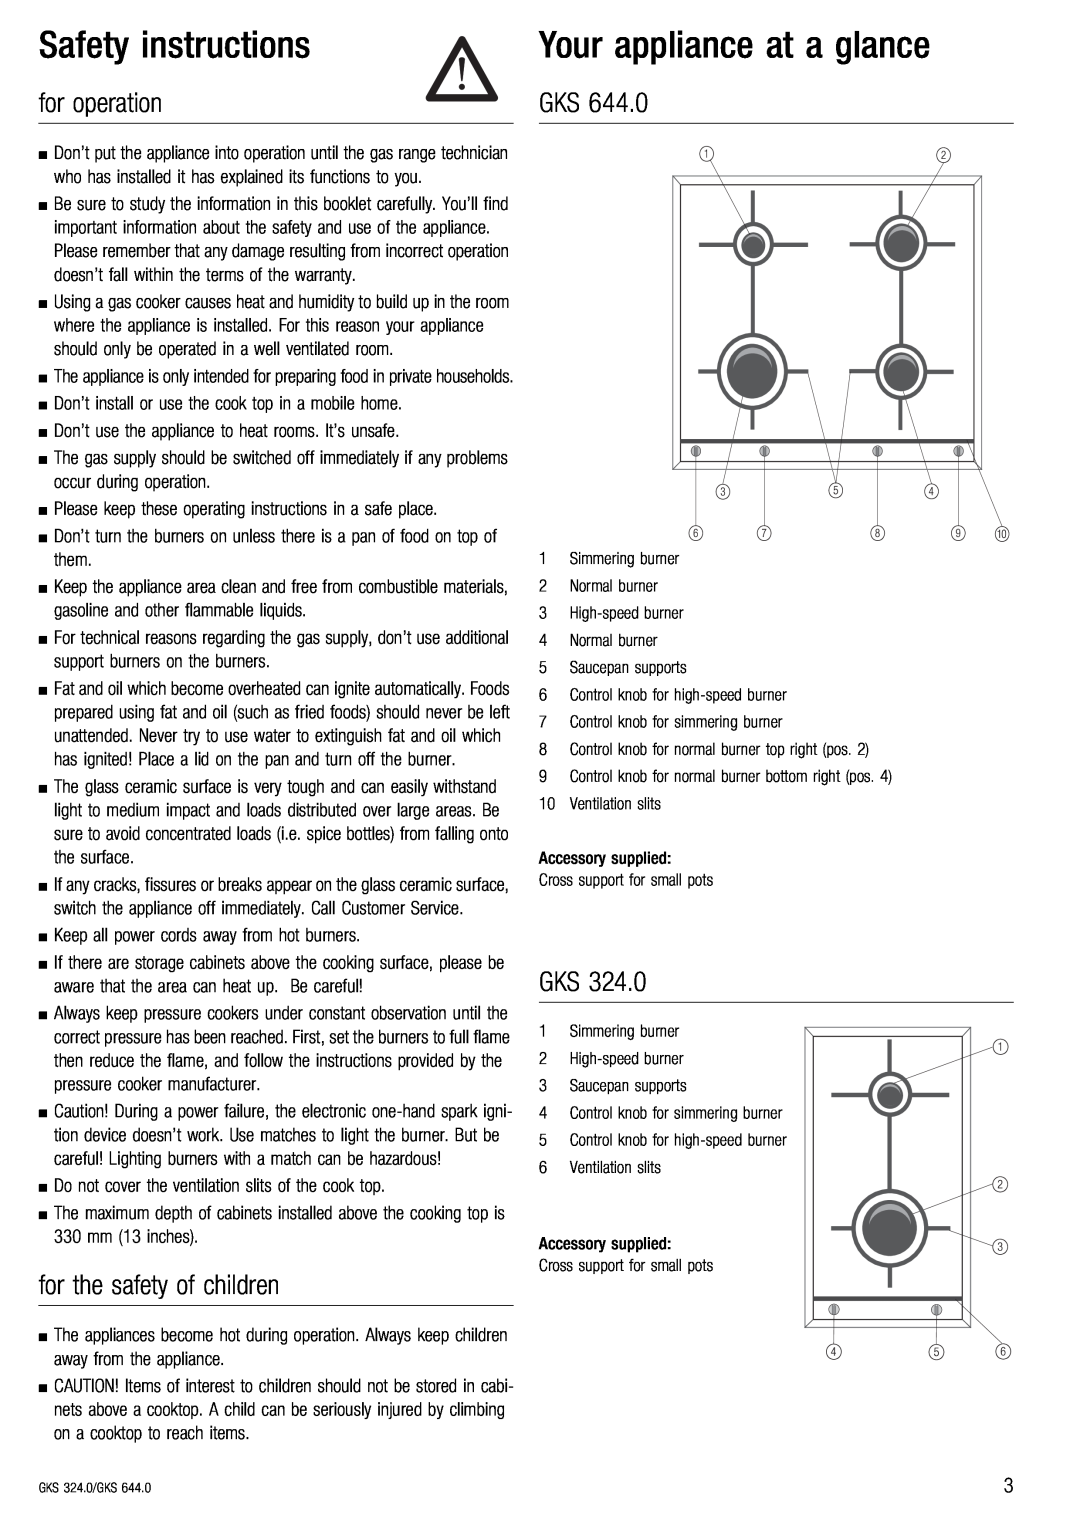 Kuppersbusch USA GKS 324.0 Safety instructions, for operation, for the safety of children, Your appliance at a glance 